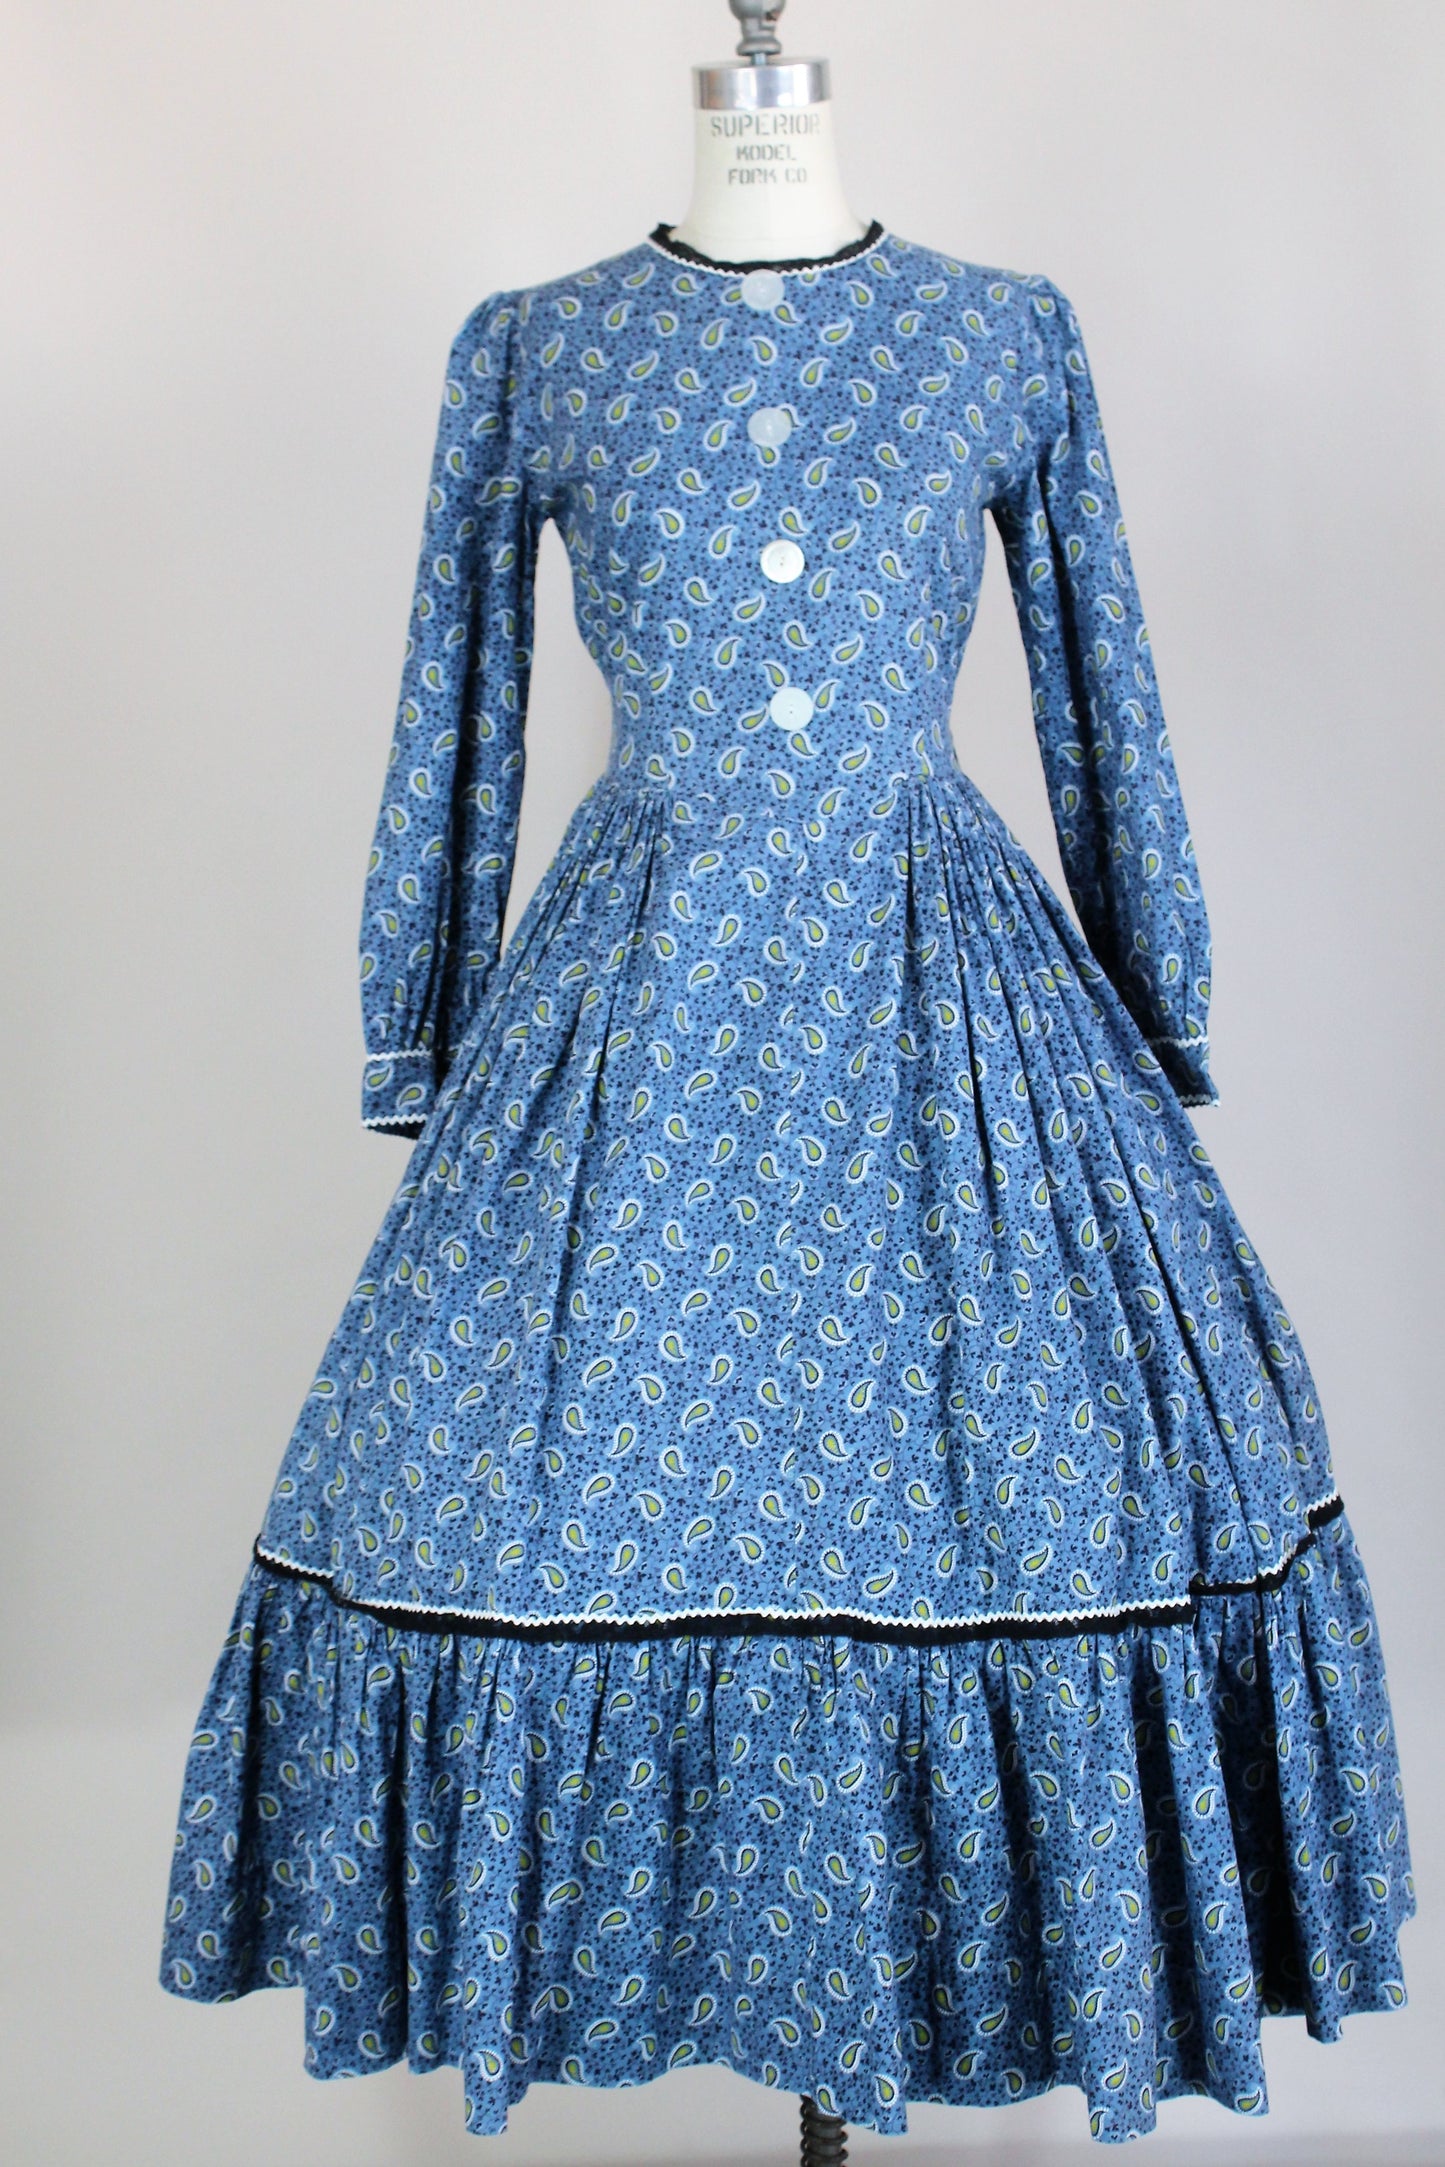 Vintage 1950s Blue Paisley Calico Cotton Fit and Flare Dress